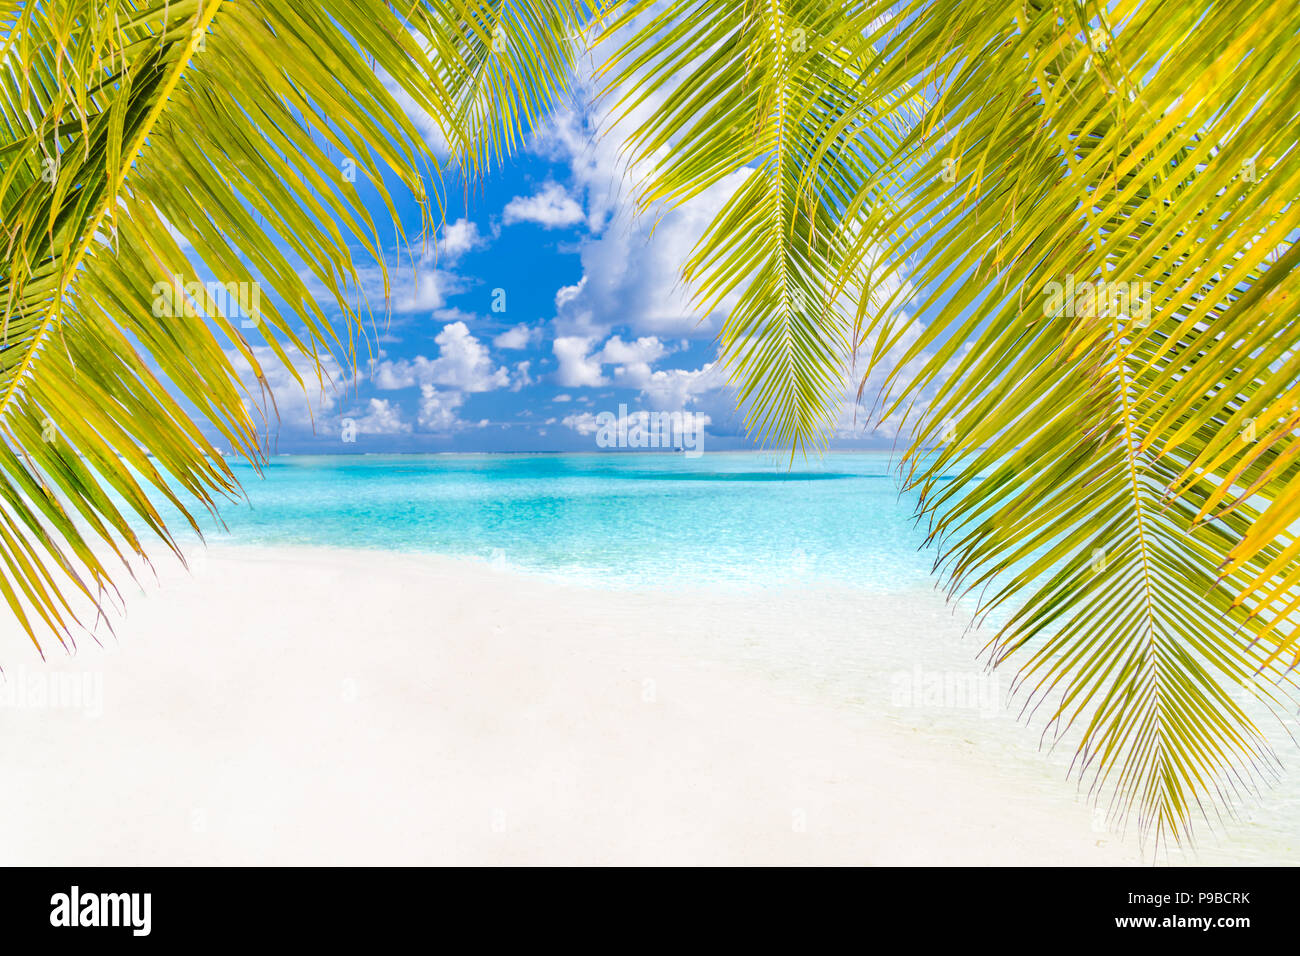 Tranquil beach banner. Palm trees and amazing blue sea view with white sand Stock Photo